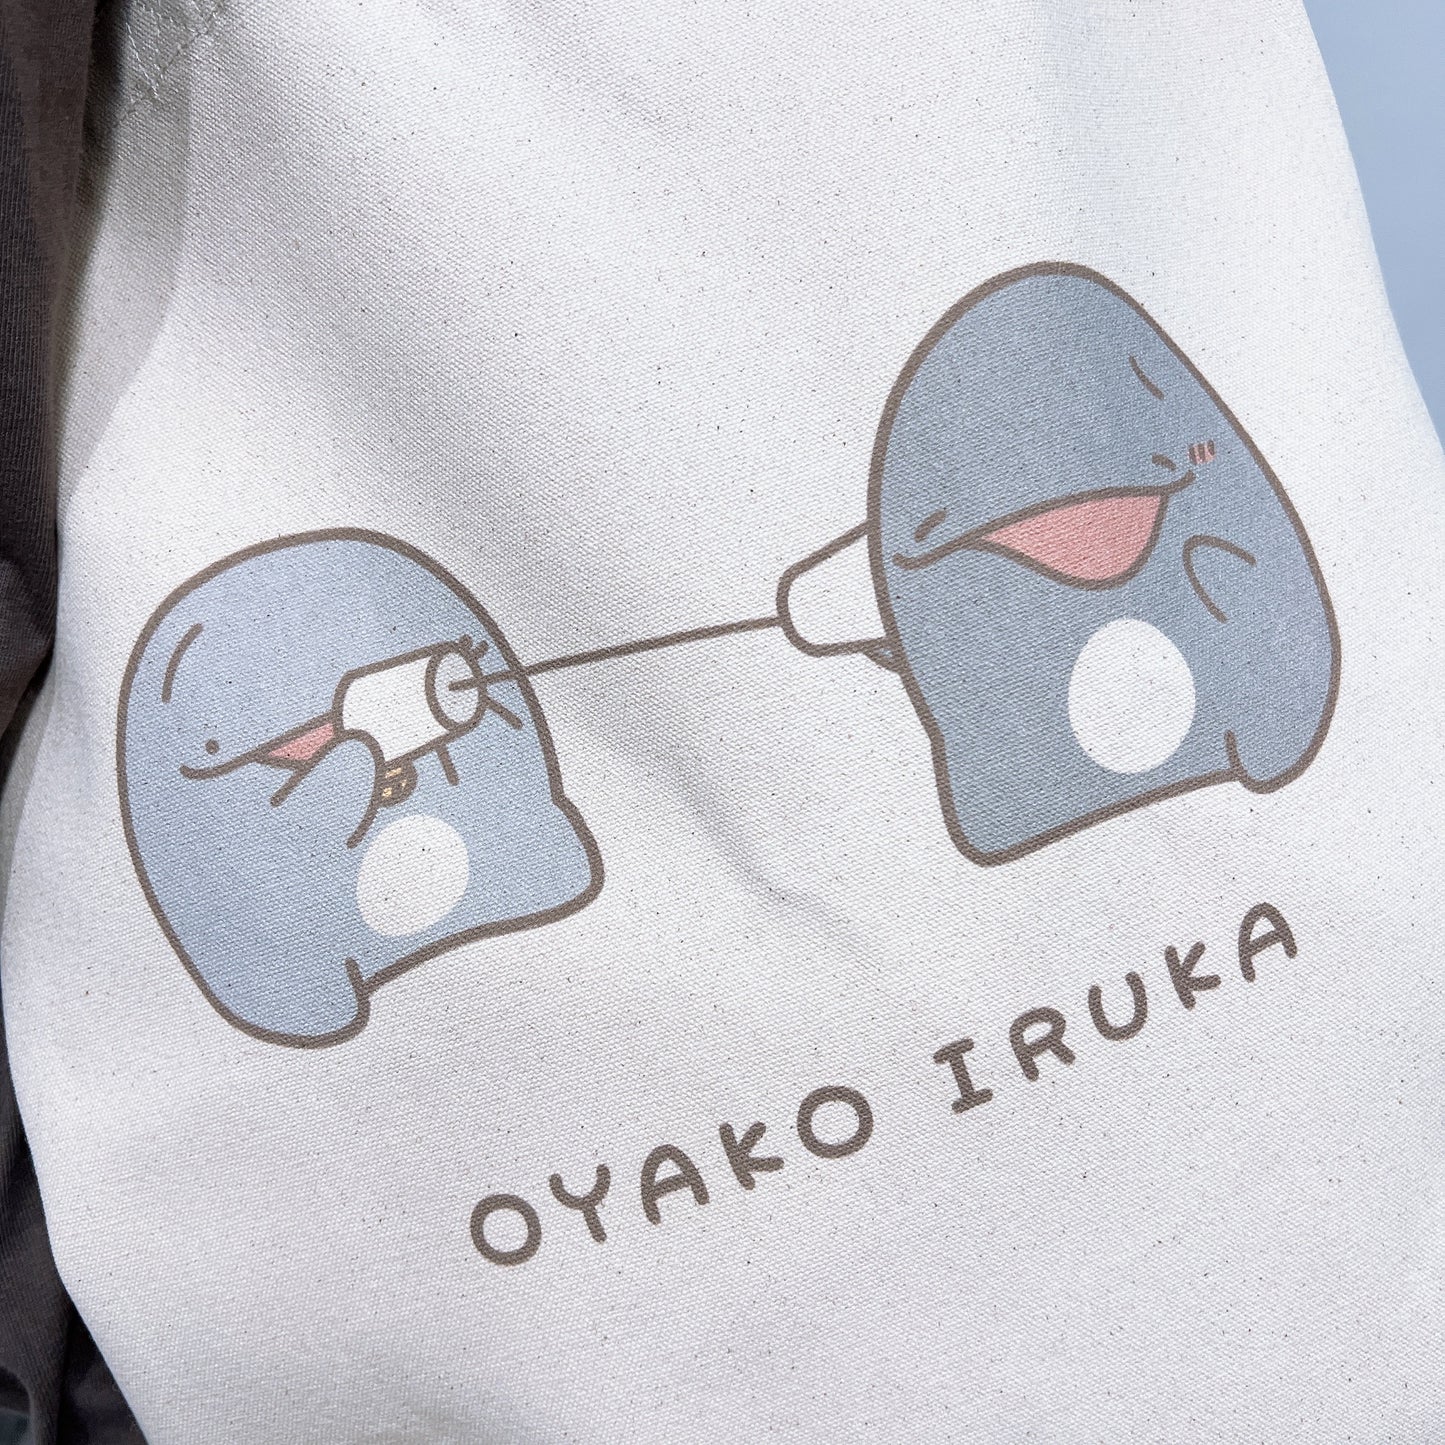 [Parent and child dolphin] Tote bag [shipped in early November]